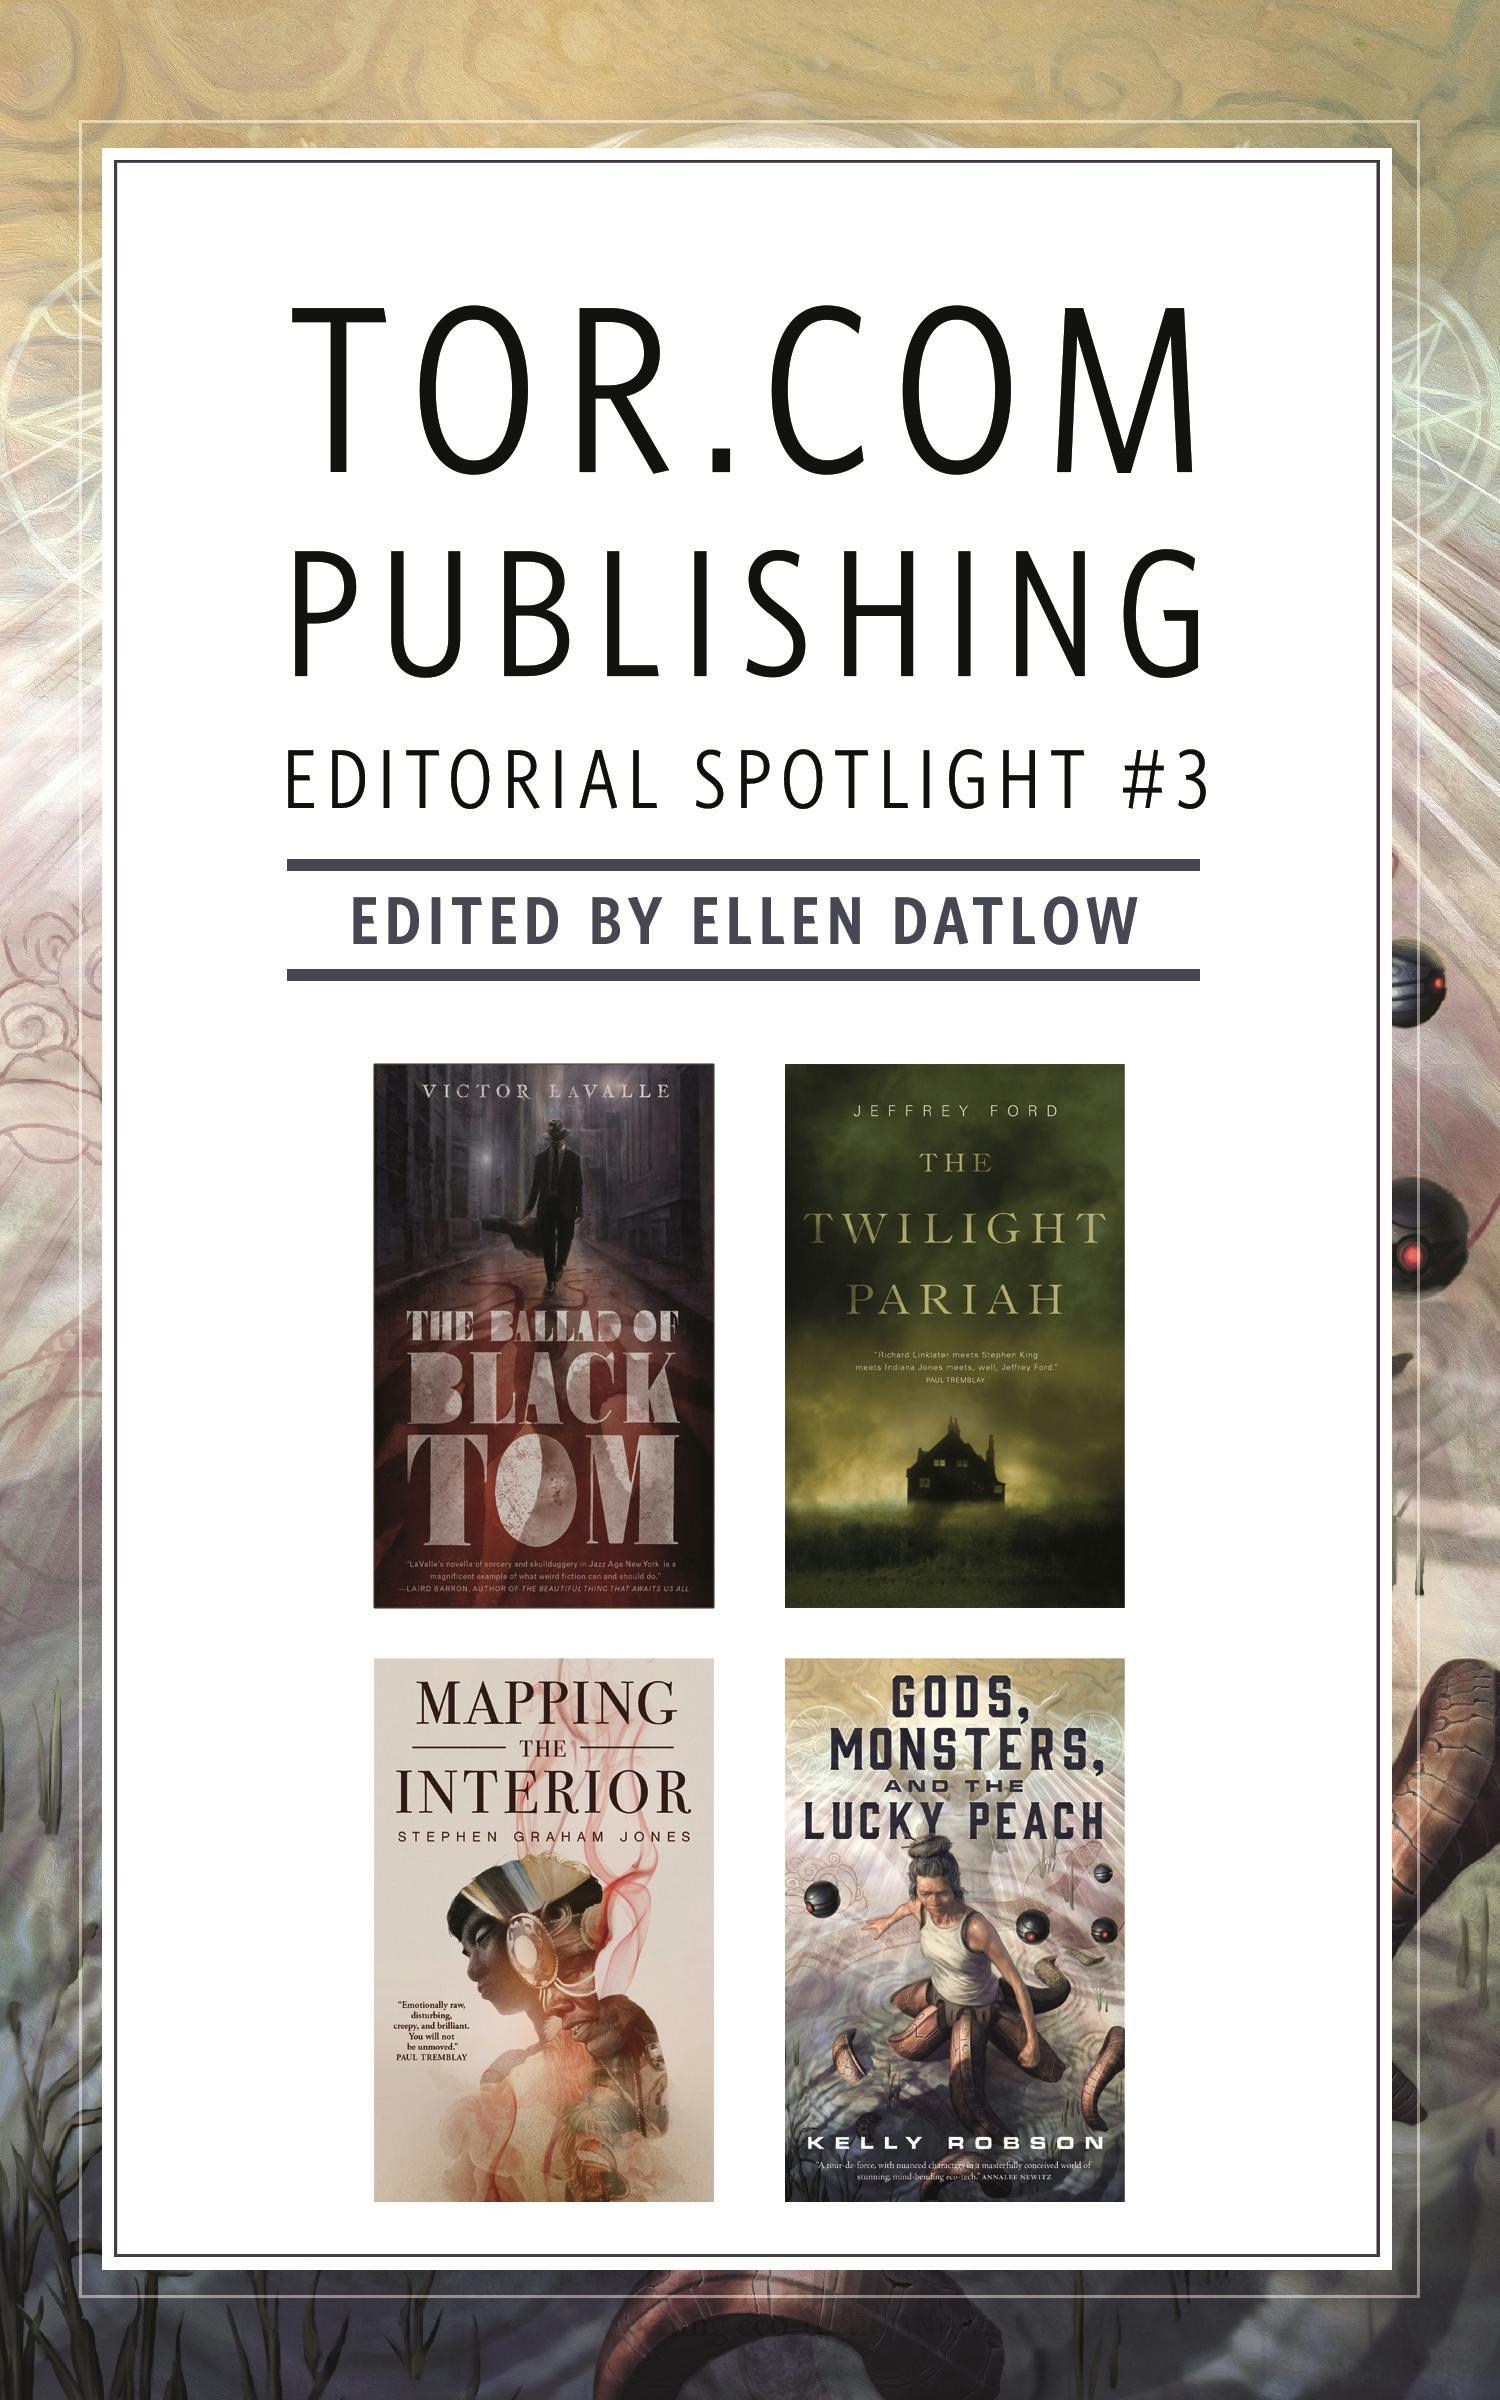 Cover for the book titled as: Tor.com Publishing Editorial Spotlight #3